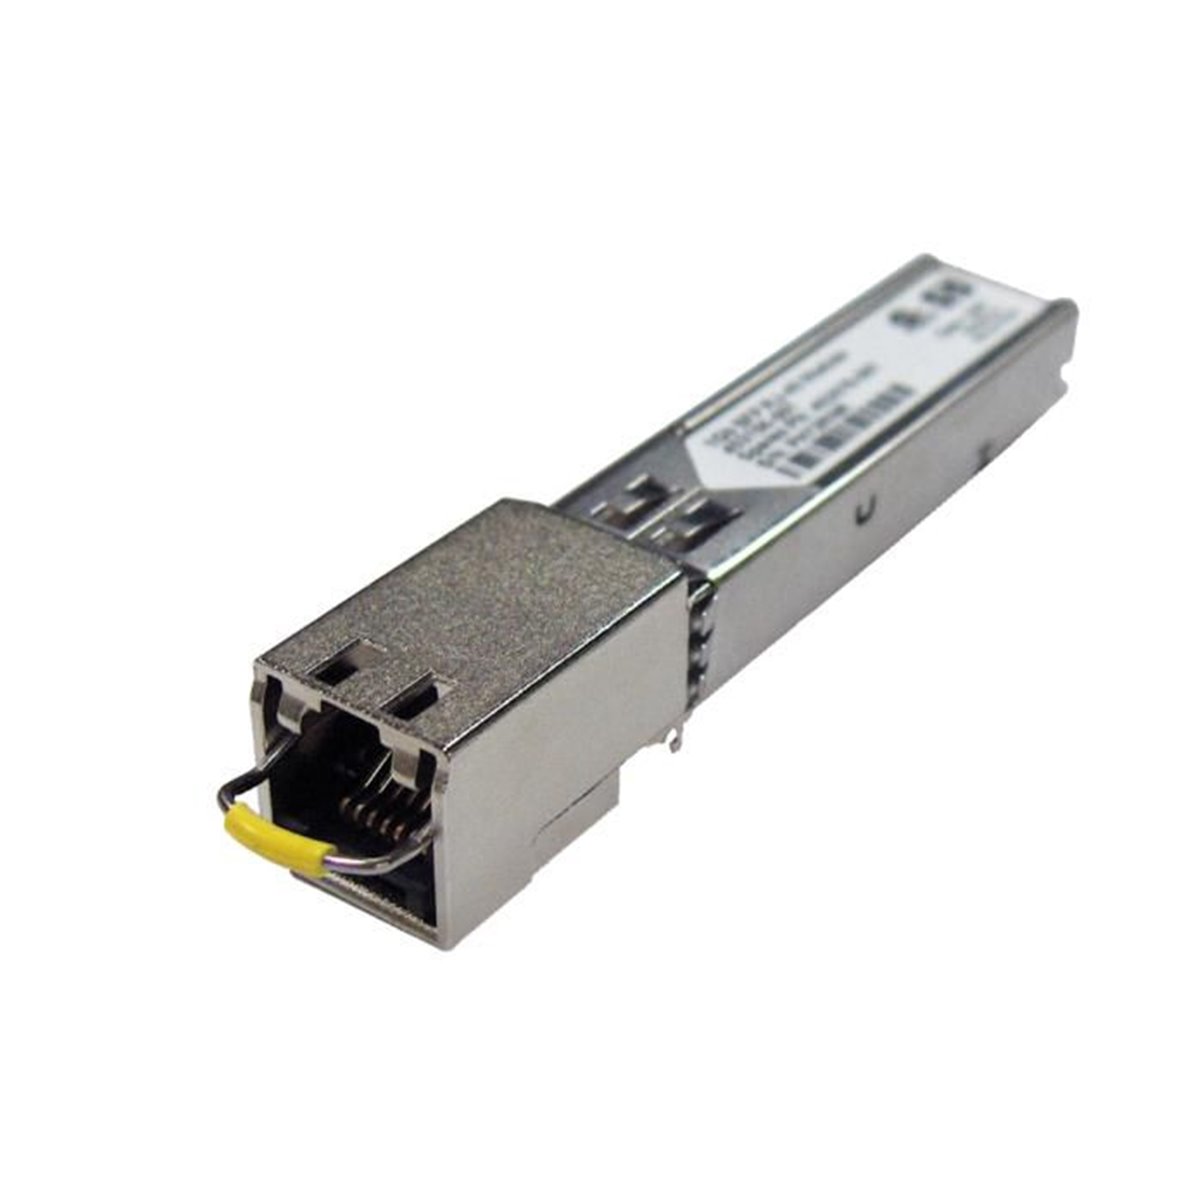 HPE QSFP28 to SFP28 Adapter